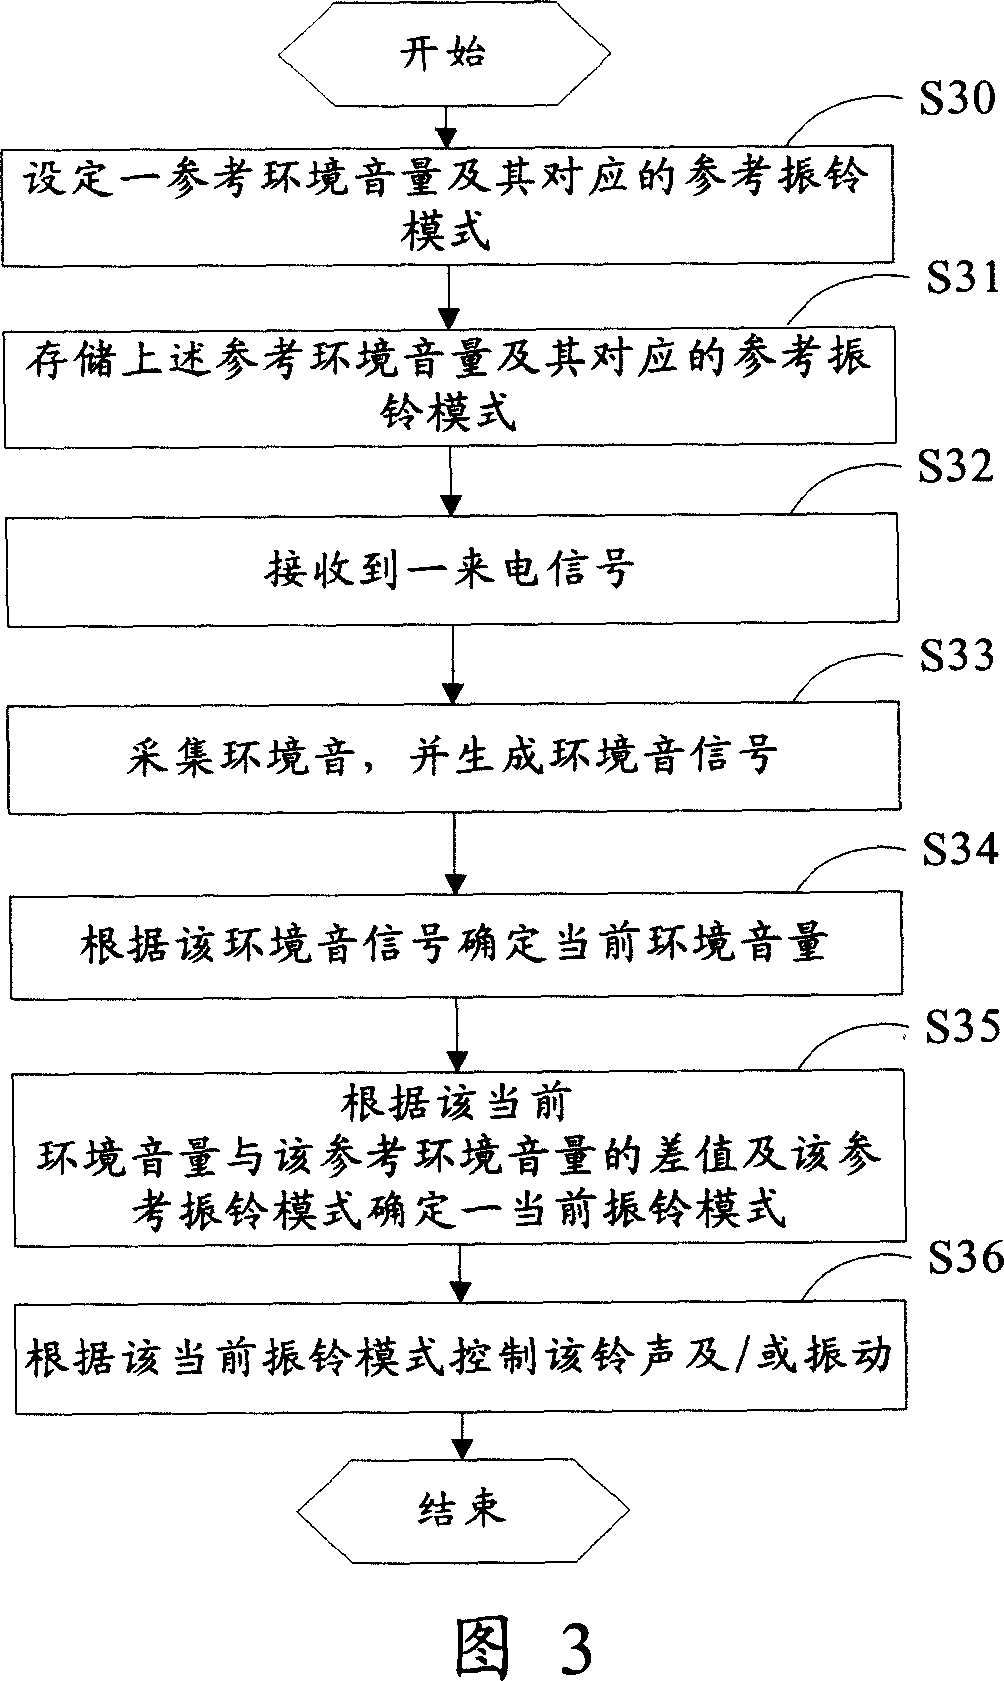 A mobile communication device and method for automatically adjusting the ring mode